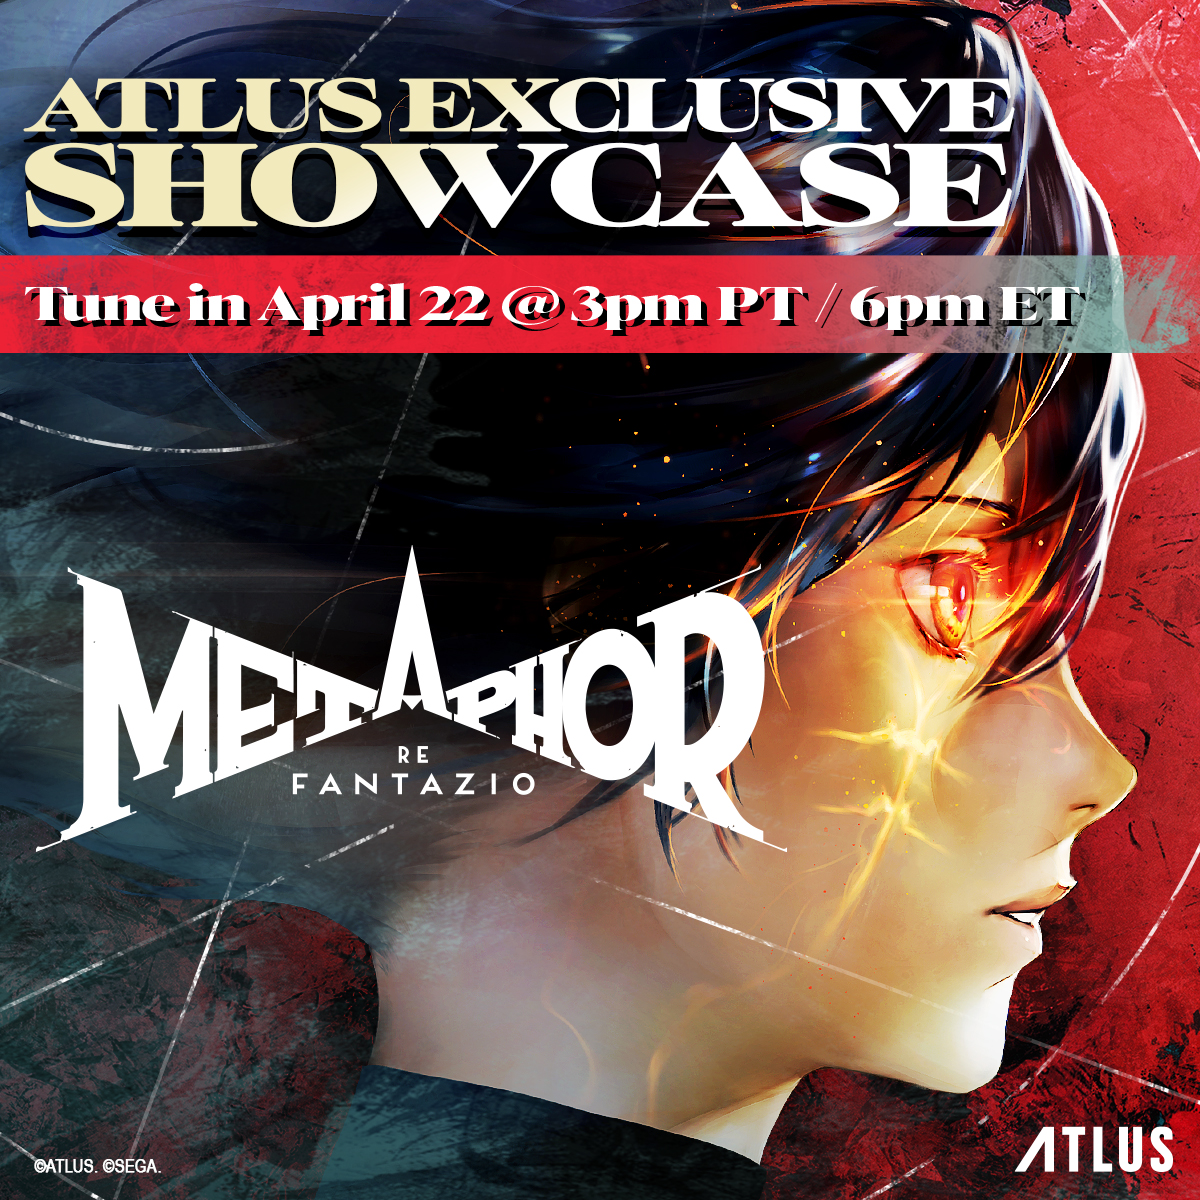 The United Kingdom of Euchronia beckons you forth once more. Watch the Metaphor: ReFantazio “ATLUS Exclusive” livestream next Monday to get the latest updates on development! 📅 April 22 🕒 3pm PT 🕕 6pm ET 🕚 12am CET YT: atlus.link/YT-Atlus-Exclu… Steam: atlus.link/Steam-Atlus-Ex…